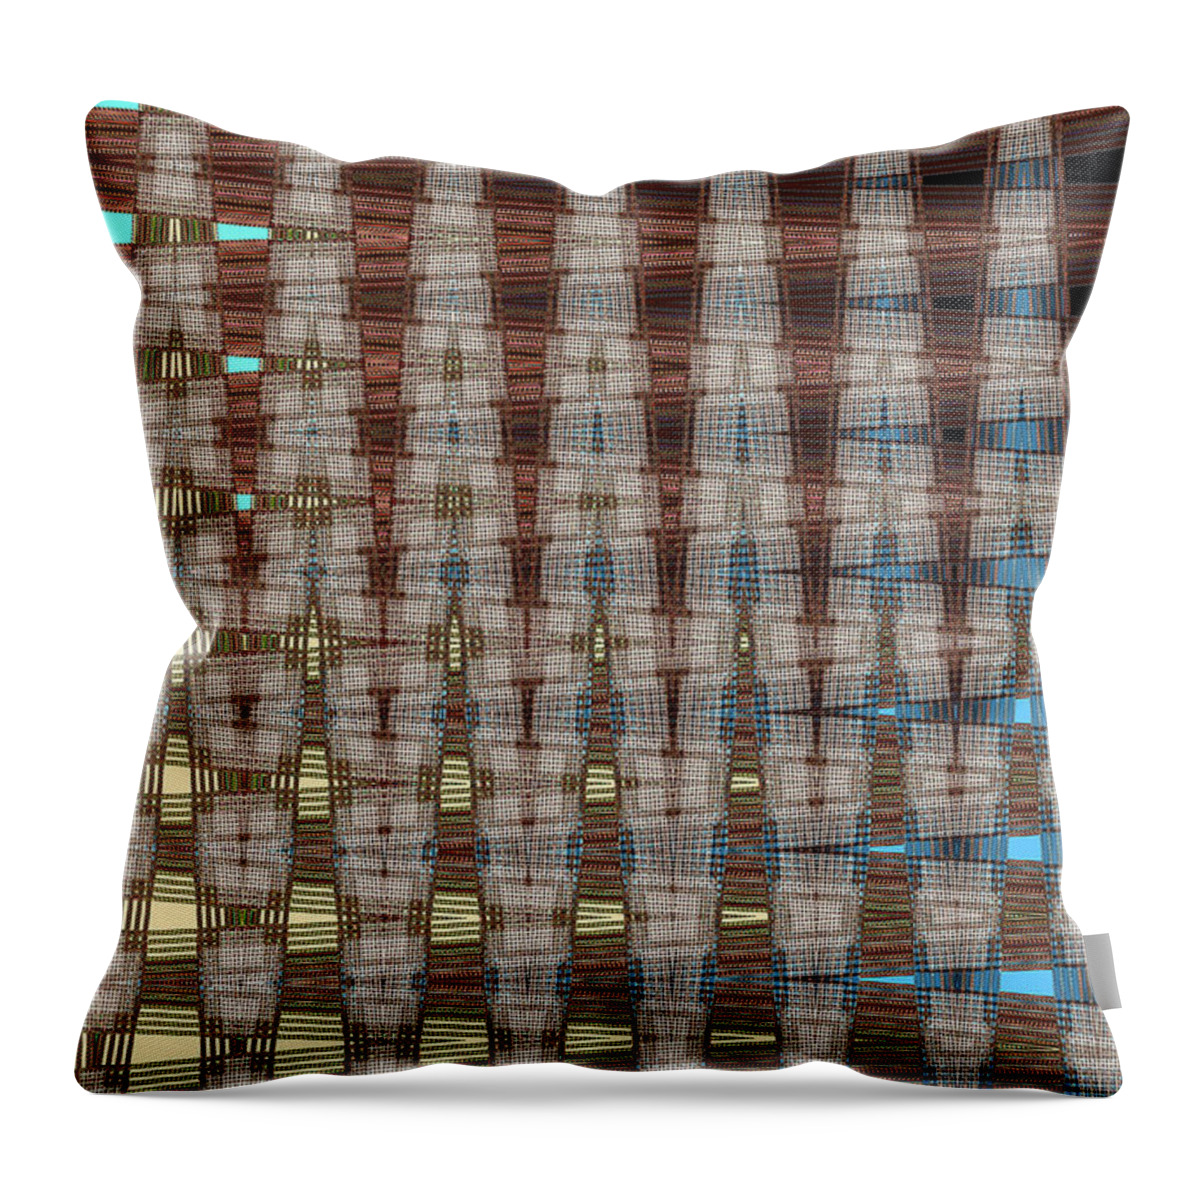 Phoenix Building Abstract # 2602ew4 Throw Pillow featuring the digital art Phoenix Building Abstract # 2602ew4 by Tom Janca